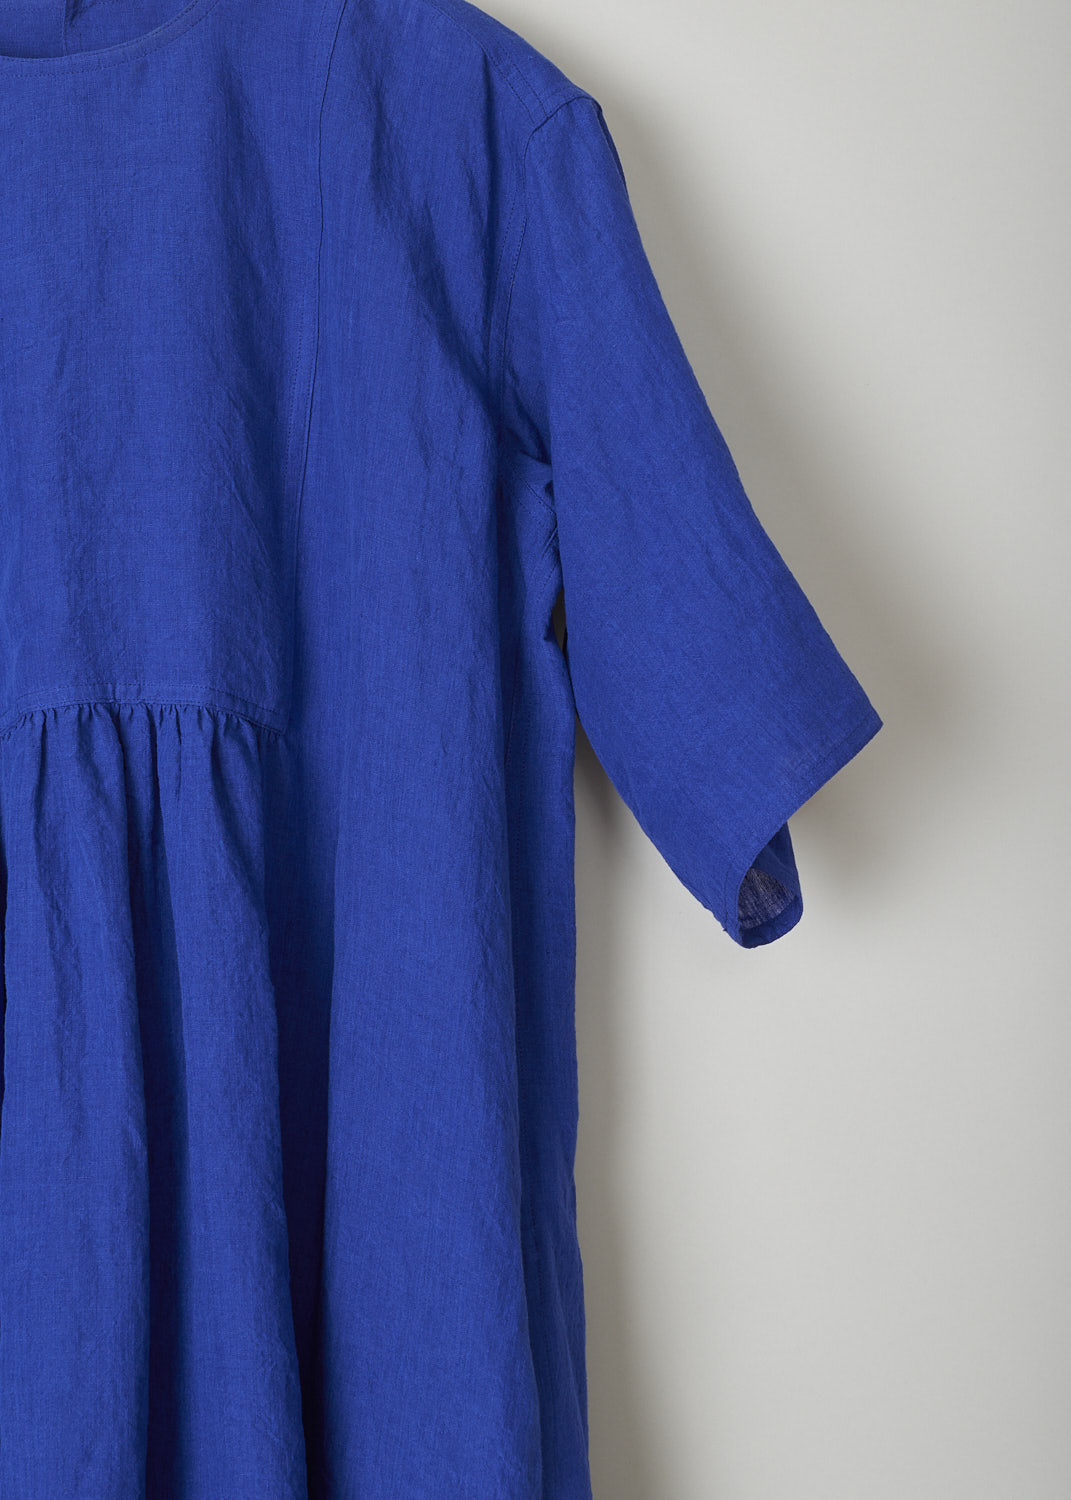 SOFIE D’HOORE, ROYAL BLUE LINEN DARNELLE DRESS, DARNELLE_LIFE_TOUAREG, Blue, Detail, This oversized royal blue midi dress features a round neckline, dropped shoulders and short sleeves. The A-line dress has a square bib-like front with pleated details below. Concealed in the side seams, slanted pockets can be found. The dress has a straight hemline with slits on either side. 

